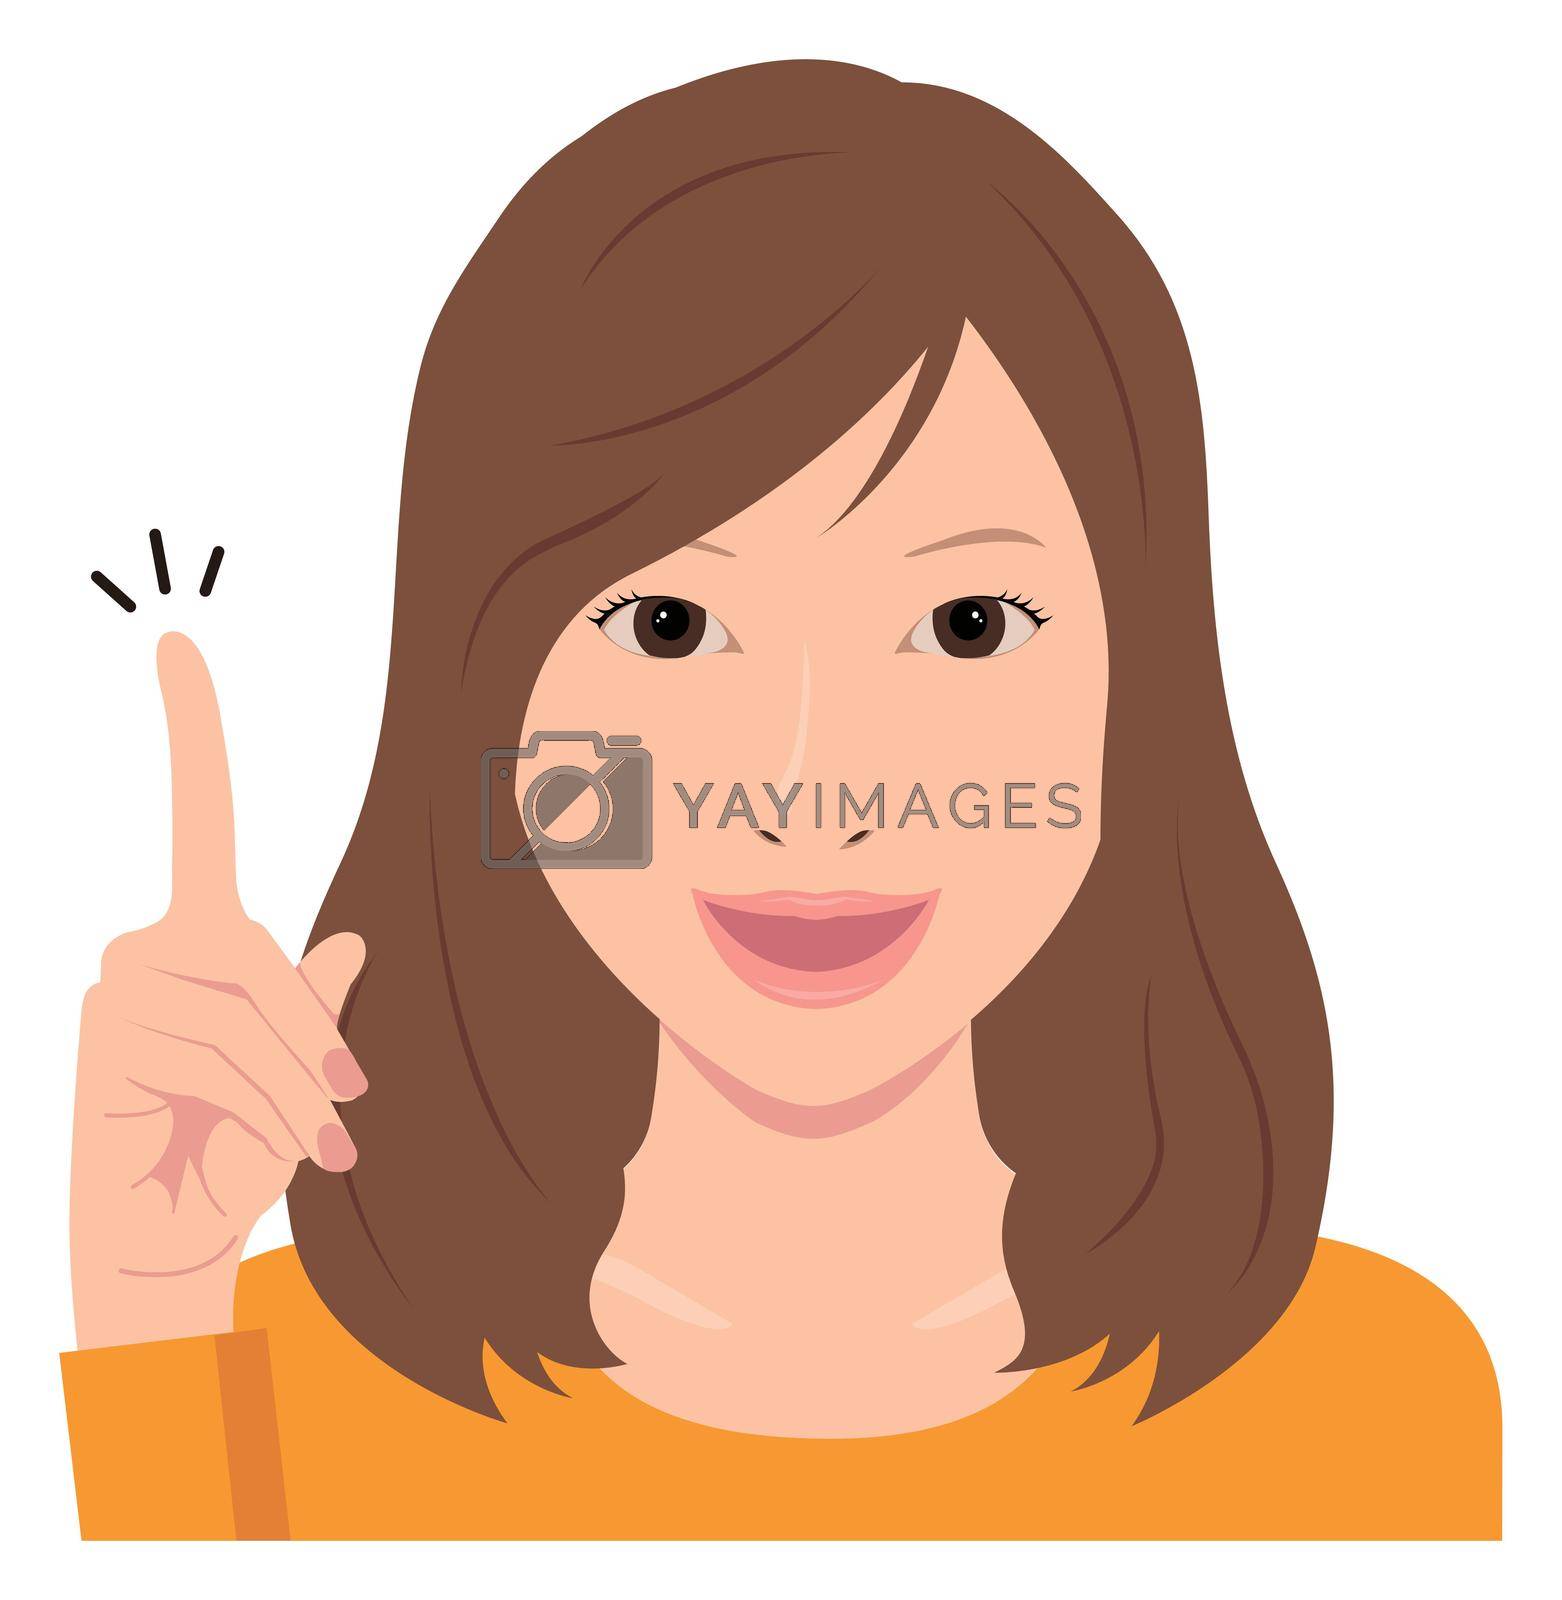 Royalty free image of Young woman vector illustration / hand gesture and emotional face. by barks